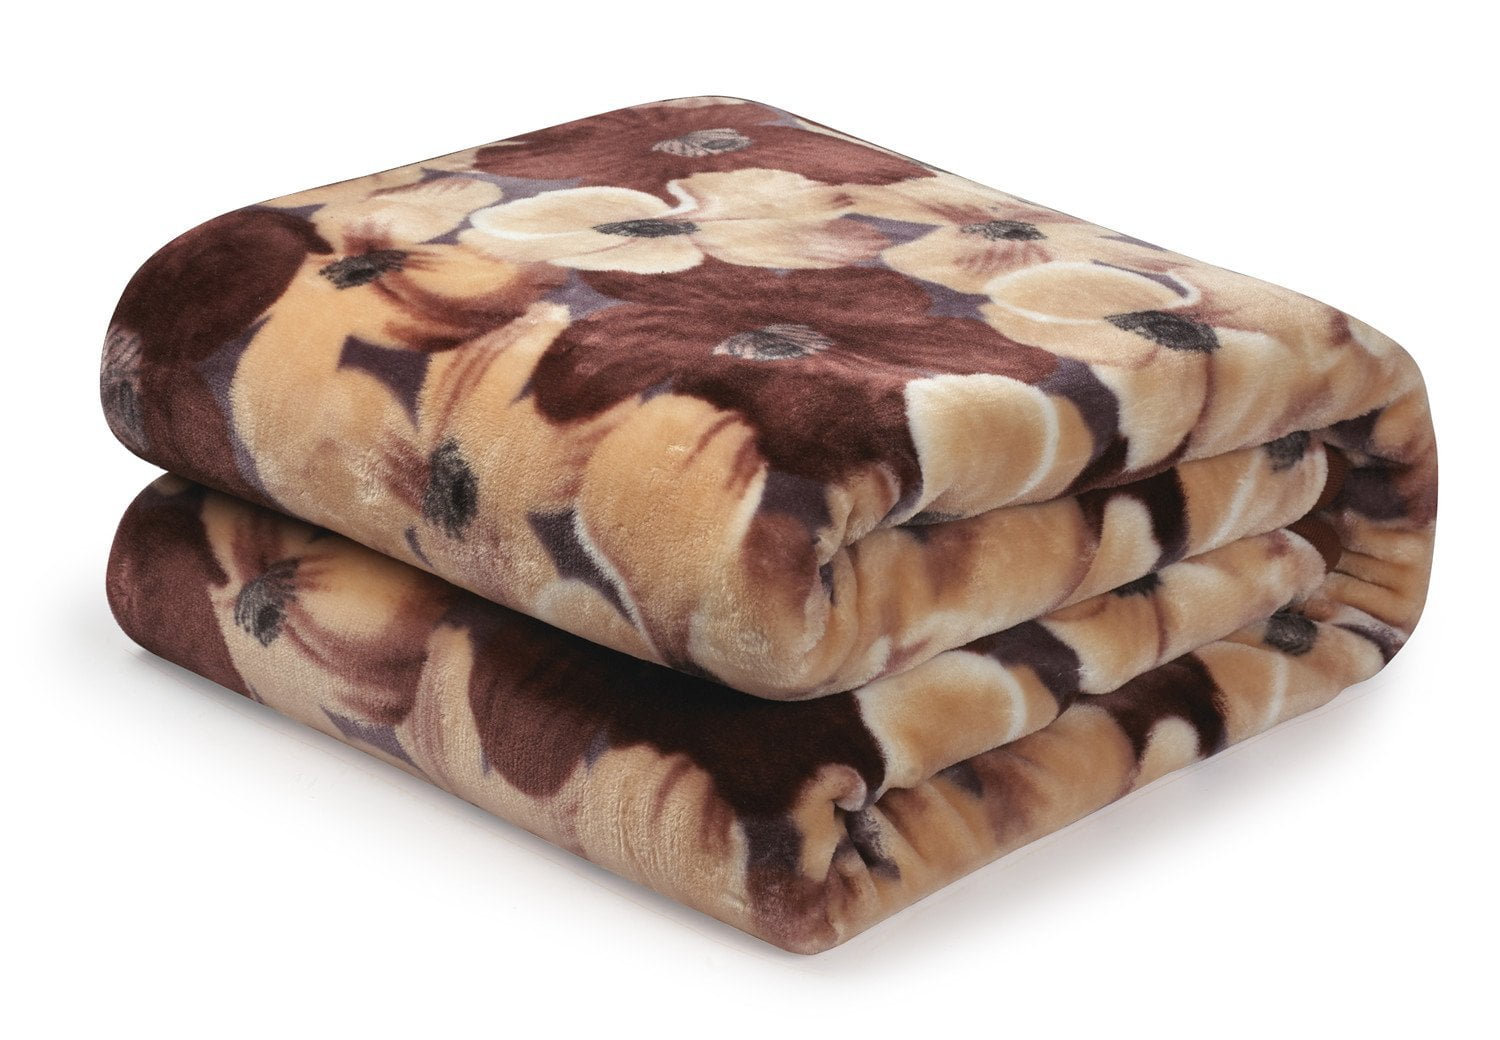 HOMECHOICE AT-RB-1PC-Q Silky Fade Resistant in Queen Size HIG Premium Thick Blanket with Double Layer Reversible Plush Raschel Blanket Brown Solid Color Queen, Brown Warm Hypoallergenic Supersoft 